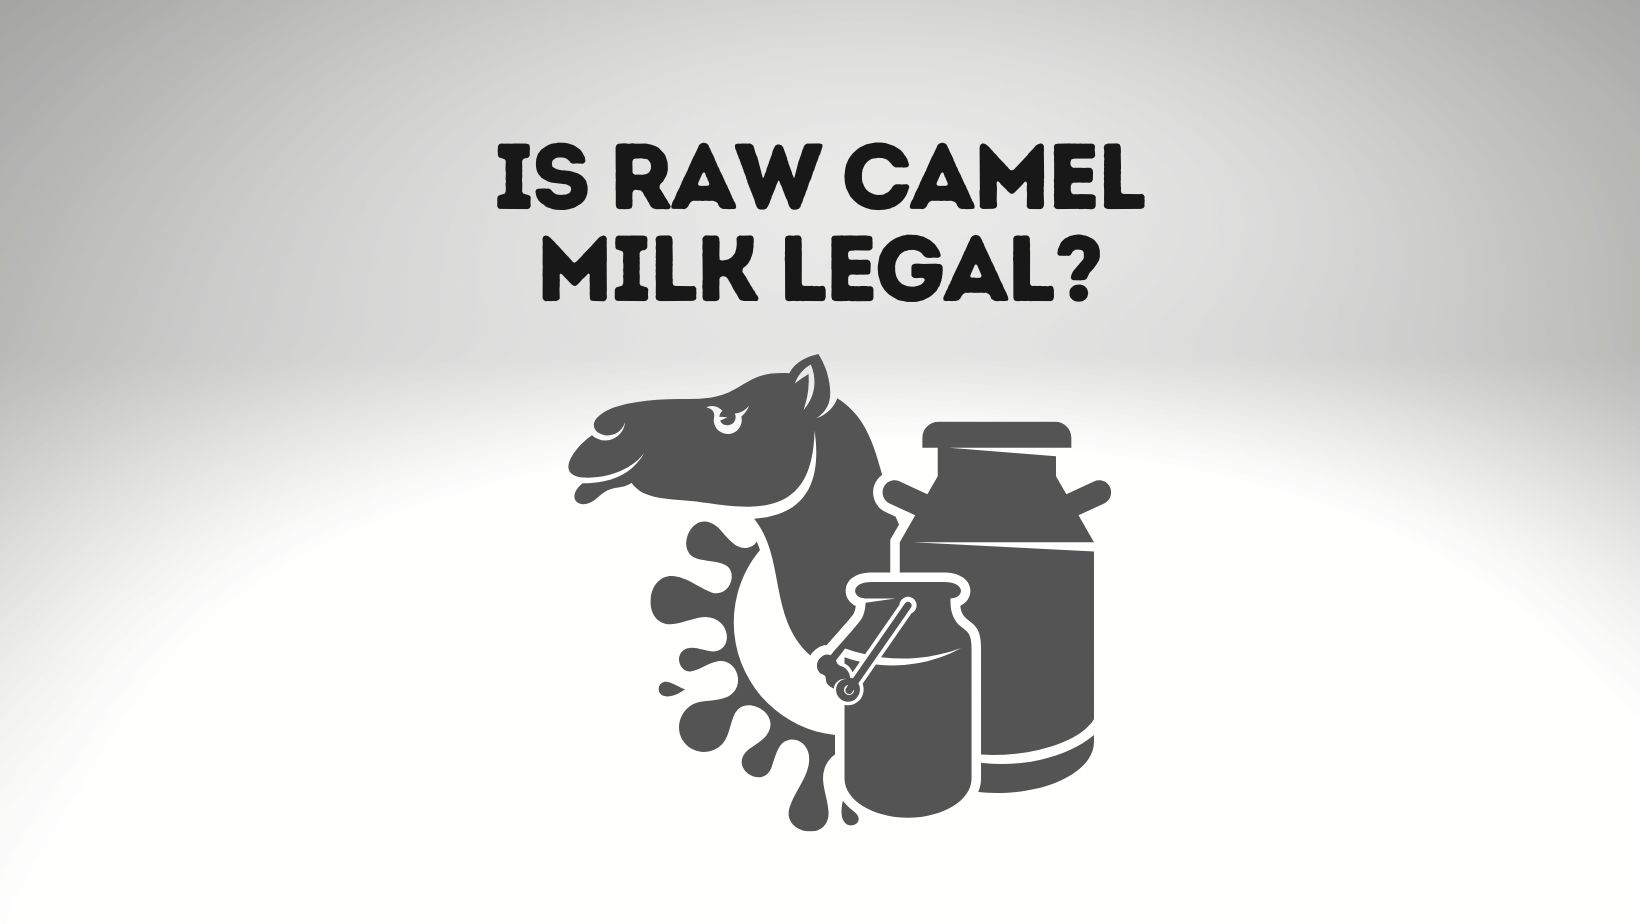 Raw Camel Milk [Legality, the FDA and Regulations]